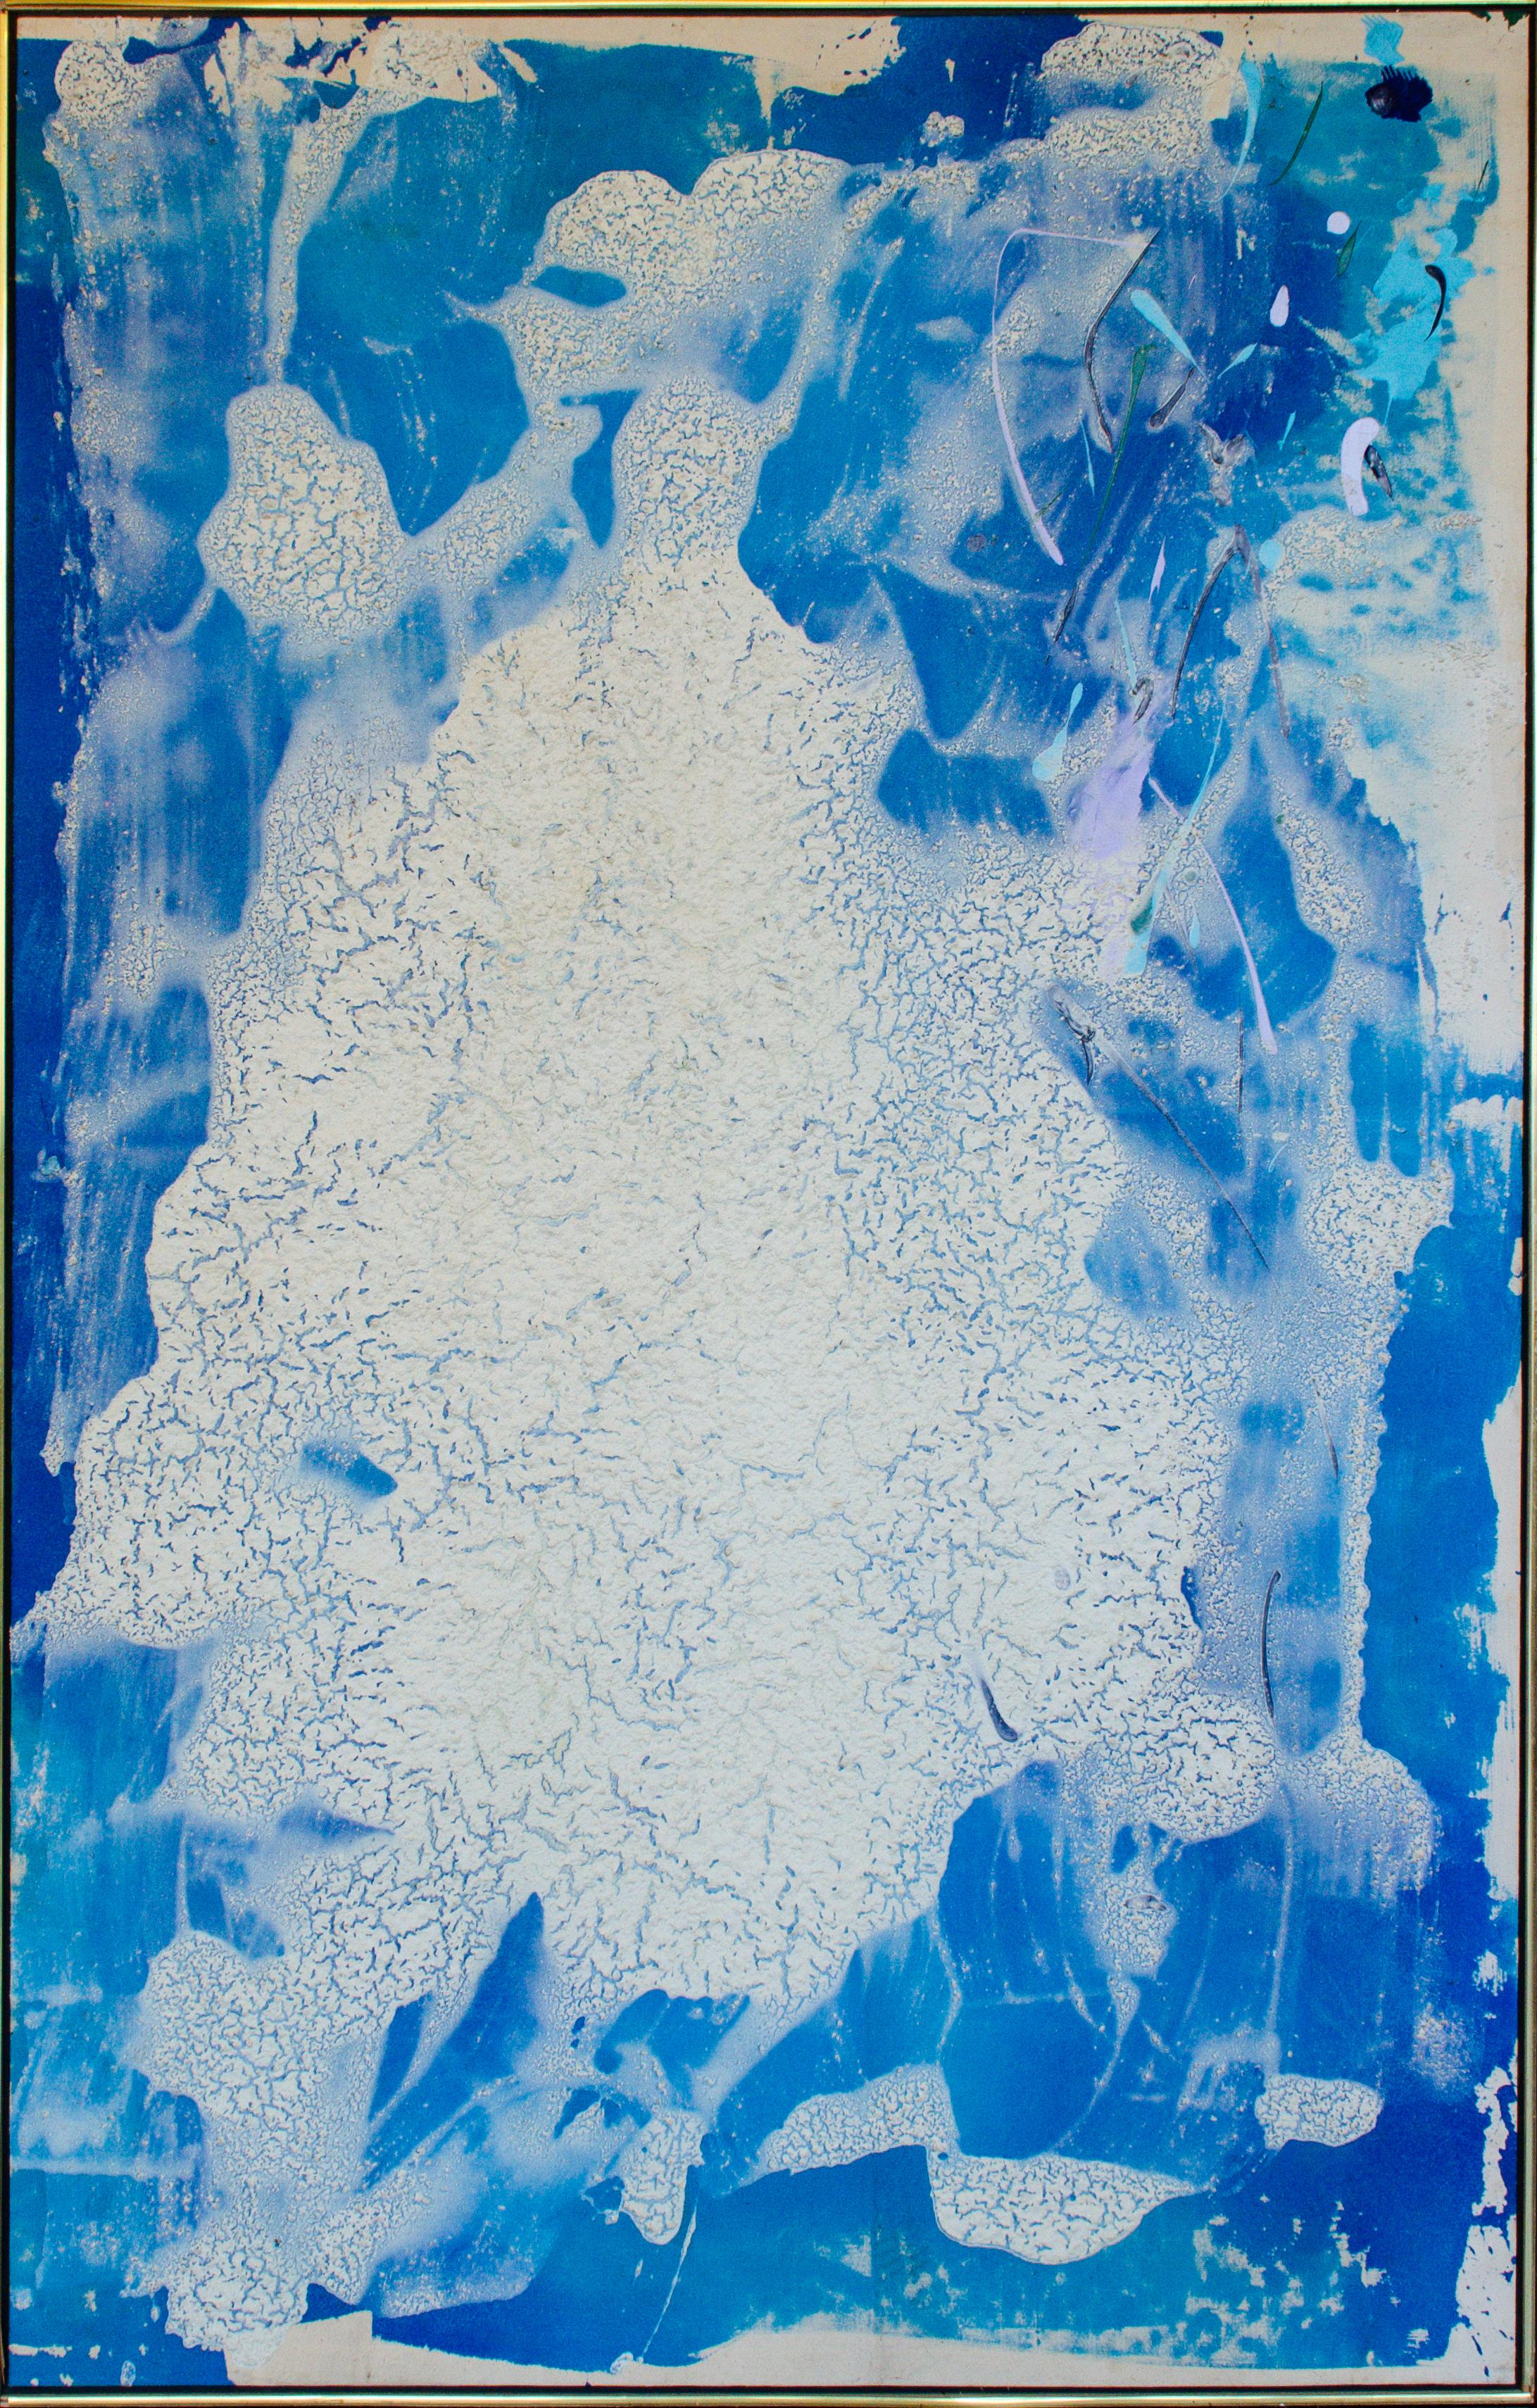 "Mr. Whisper", Sherron Francis, Female Abstract Expressionist, Blue Color Field